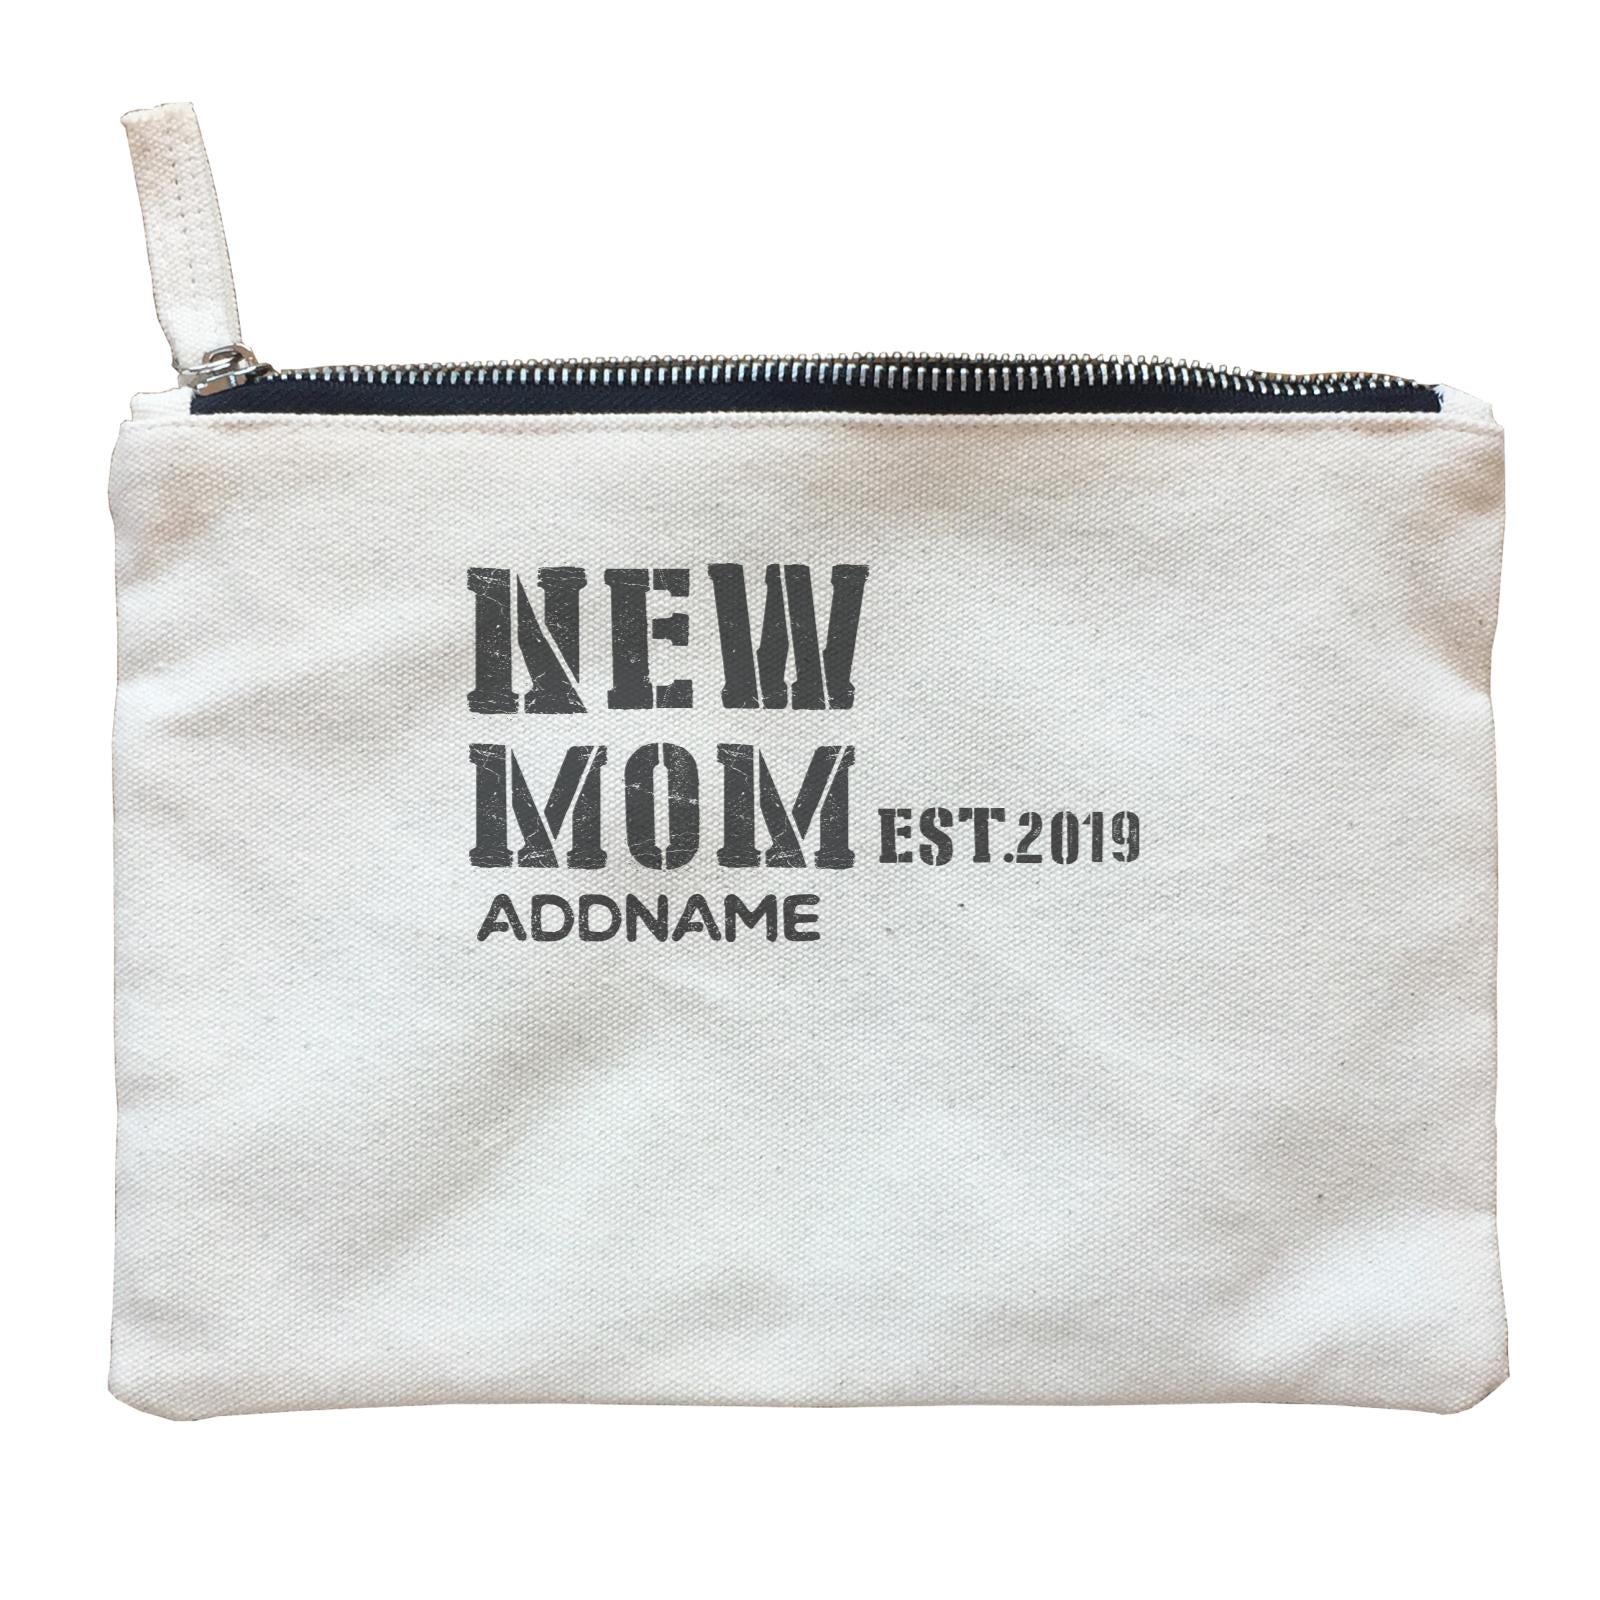 New Parent 1 New Mom Addname With Date Zipper Pouch